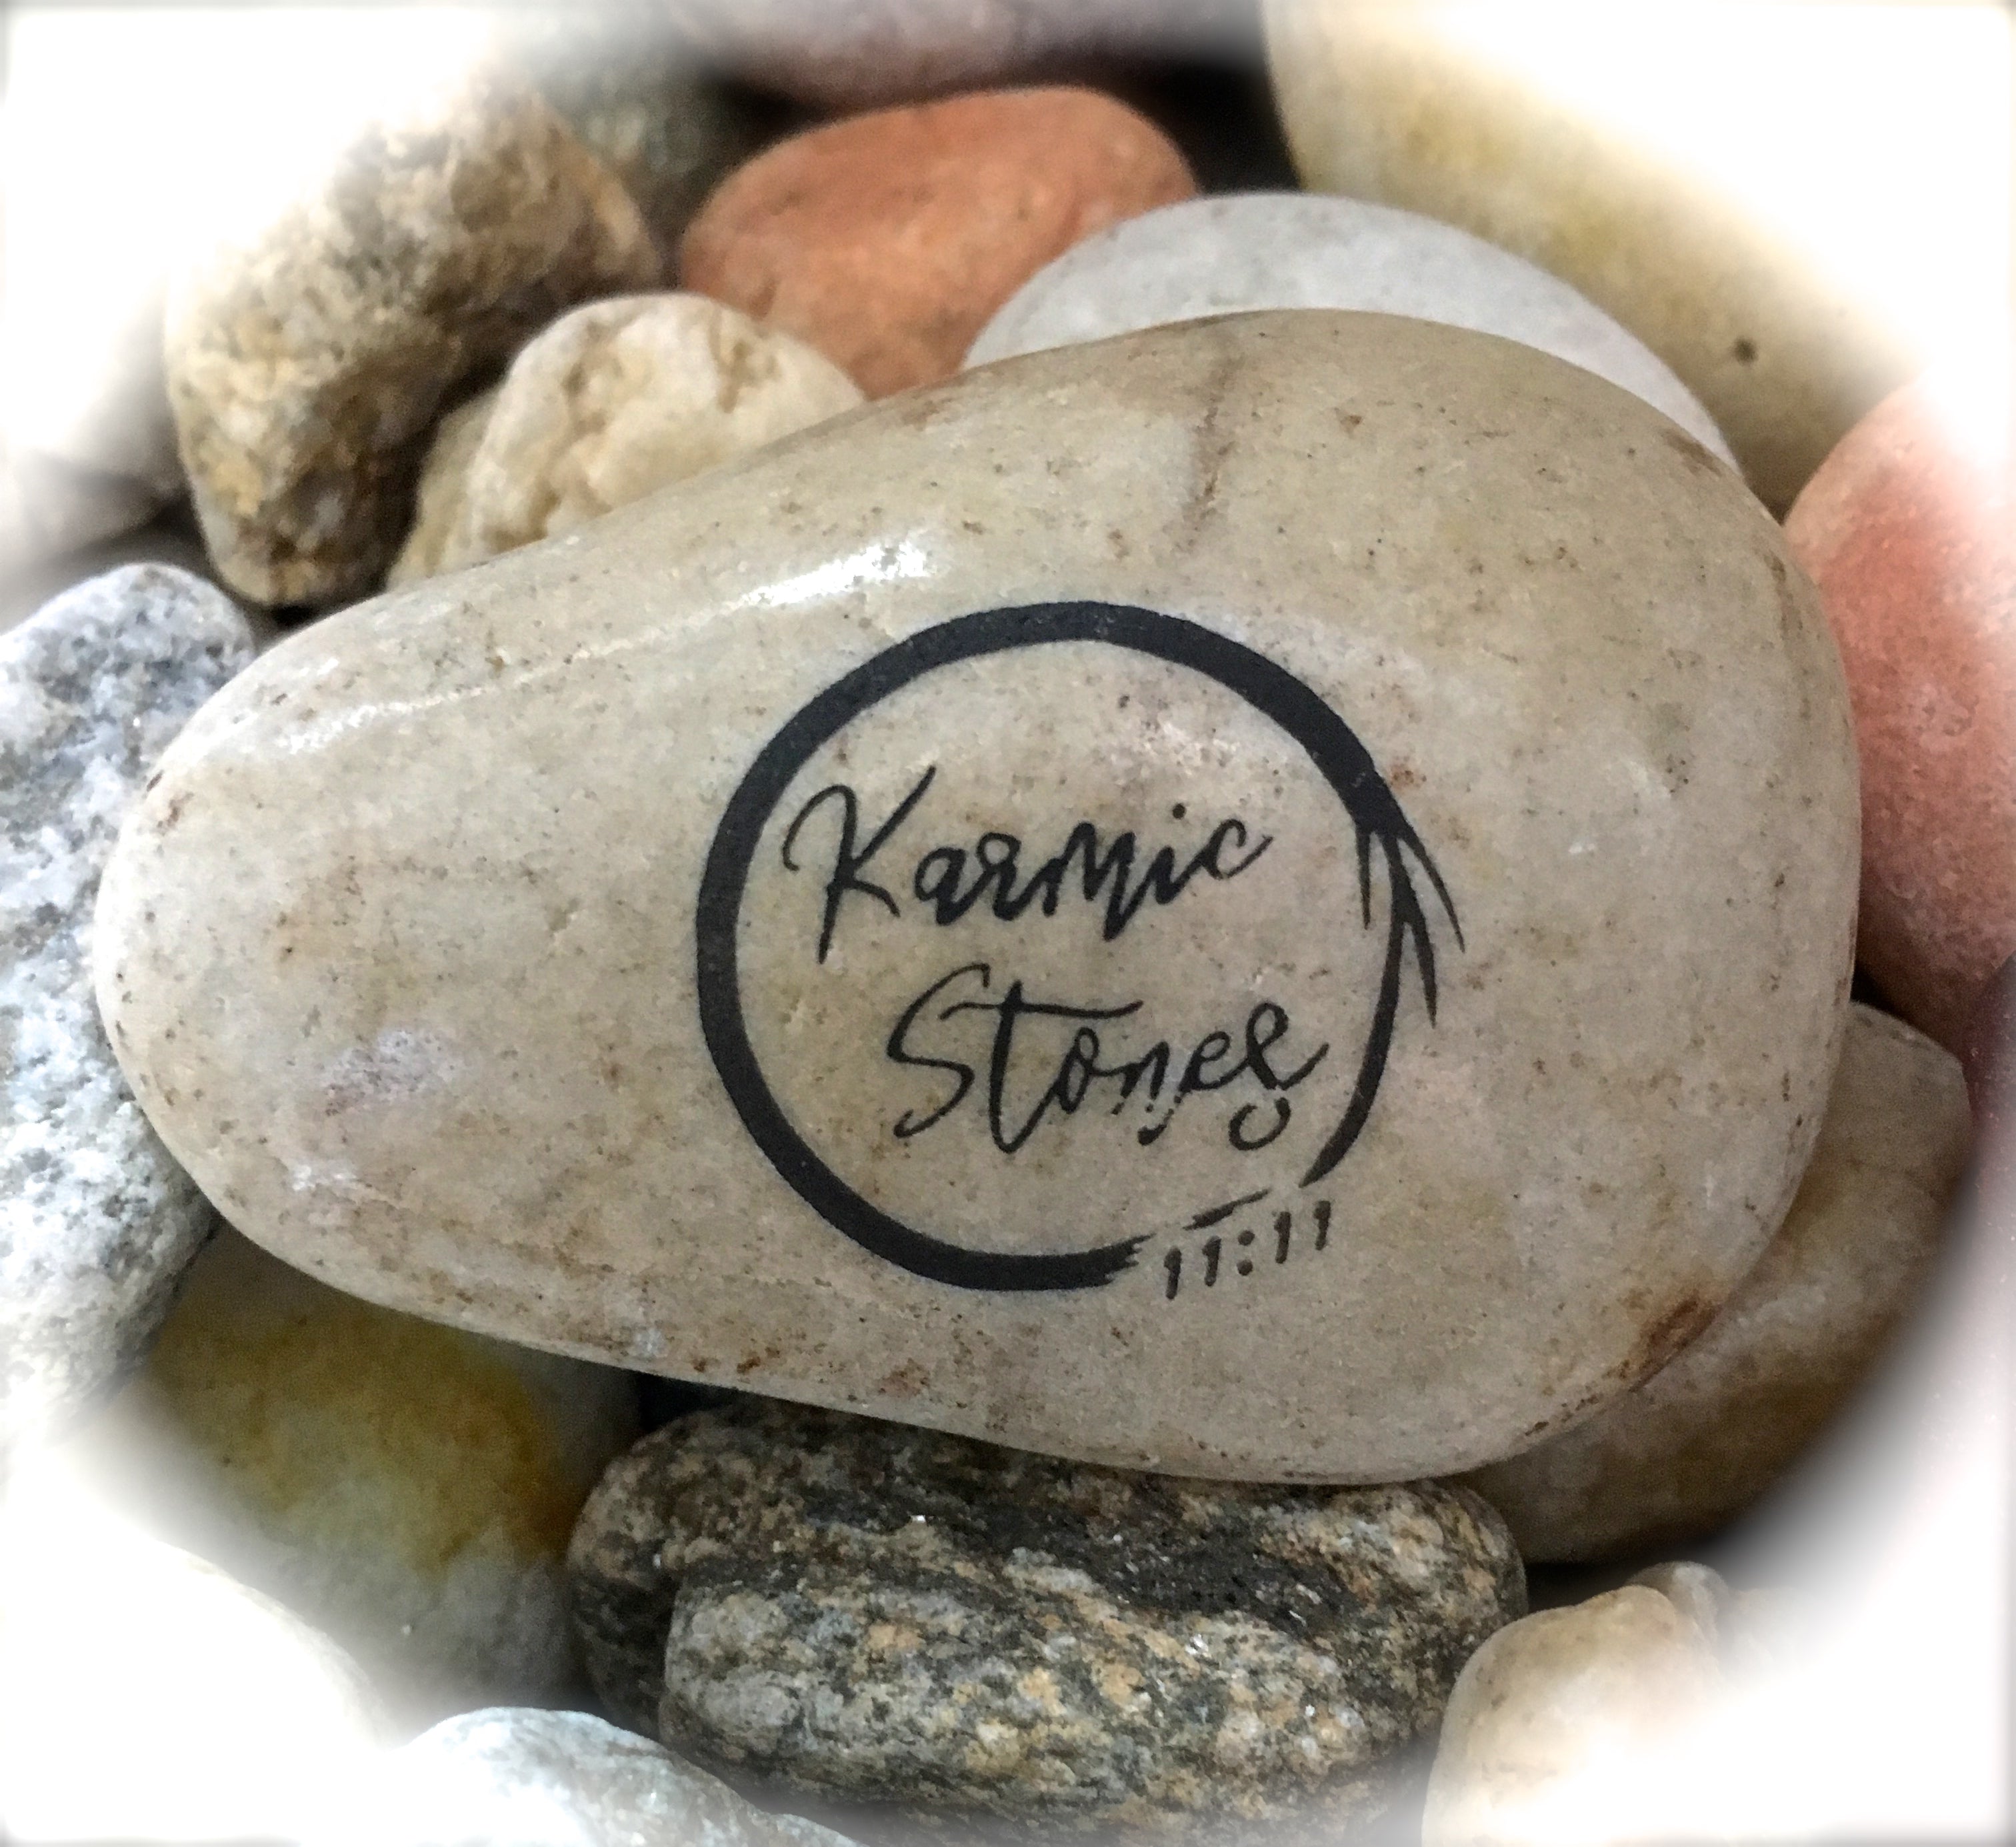 A Teacher Nourishes The Soul Of A Child For A Lifetime ~ Engraved Inspirational Rock